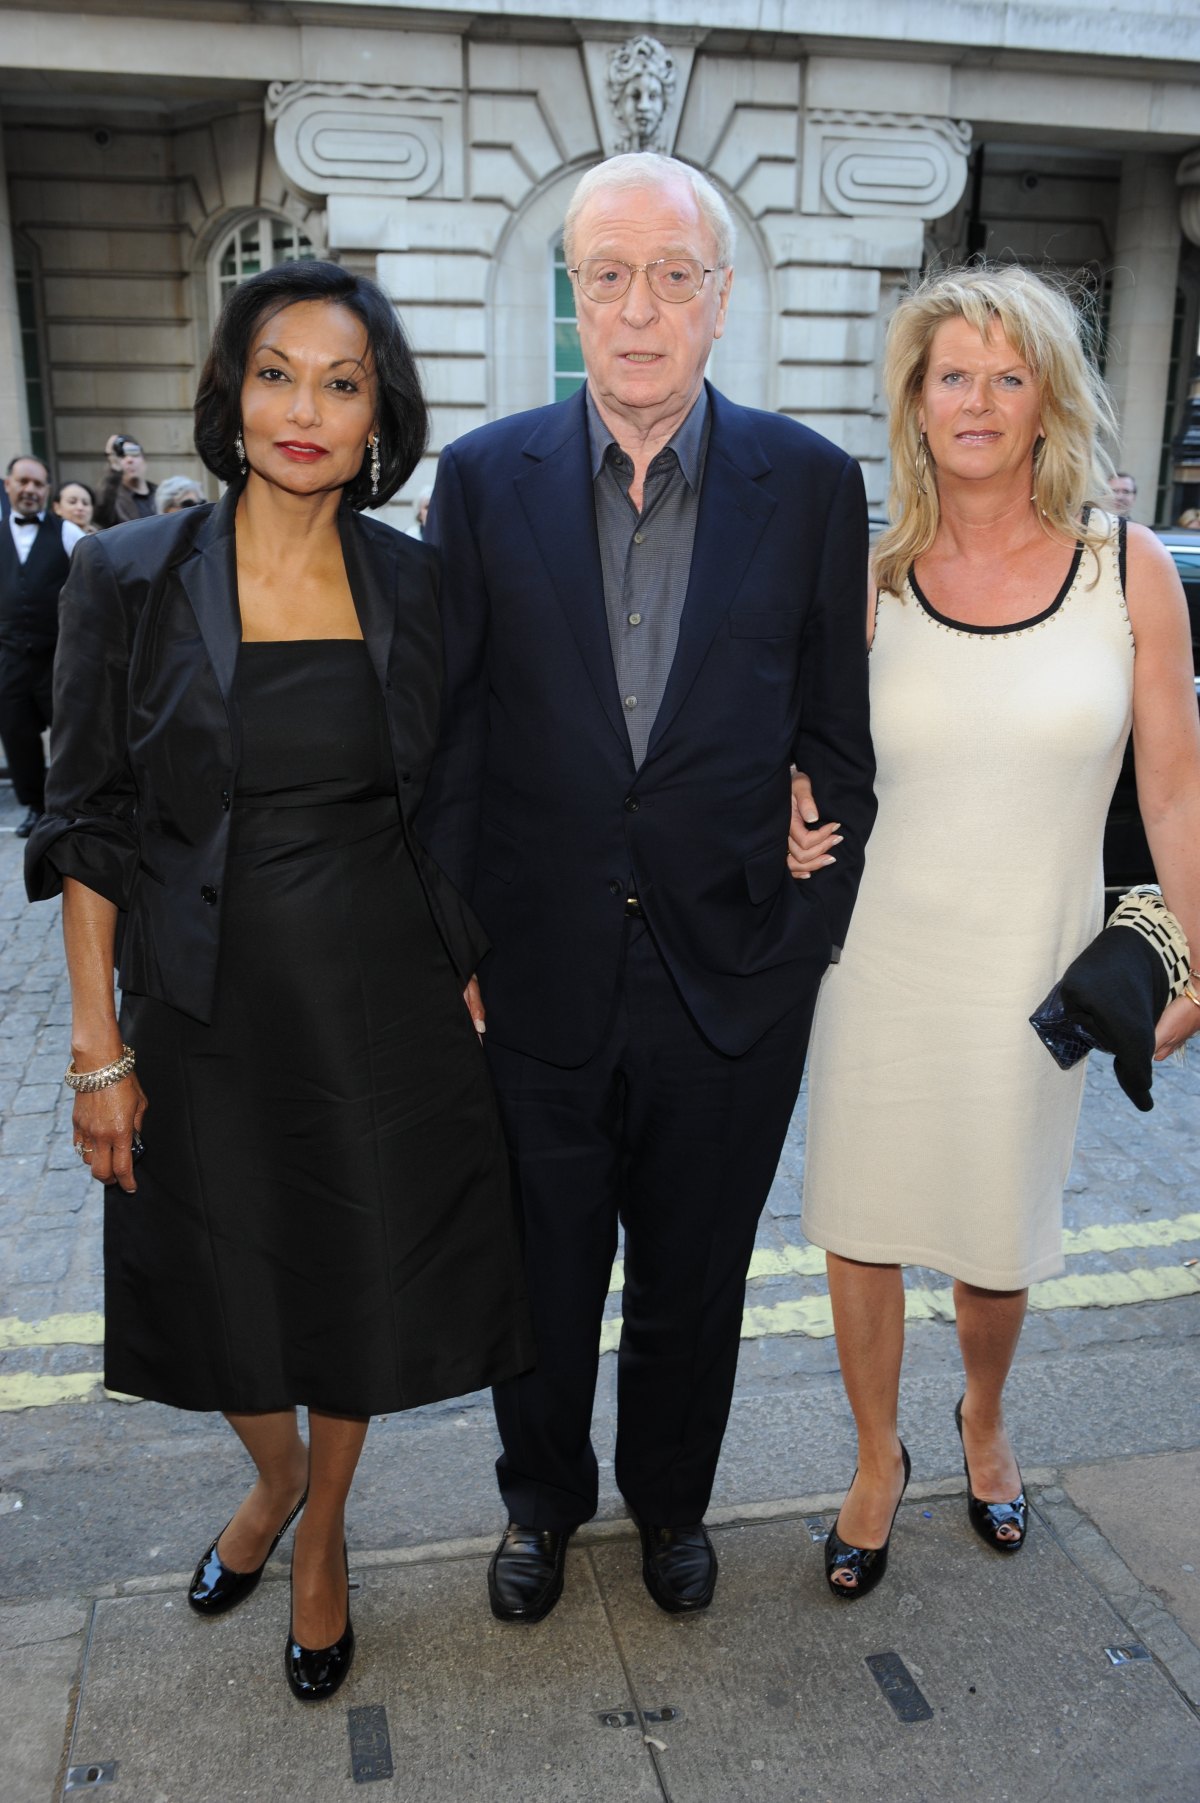 It's lucky that Corresponding the end Michael Caine Kids: Meet the Actor's 2 Grown Daughters